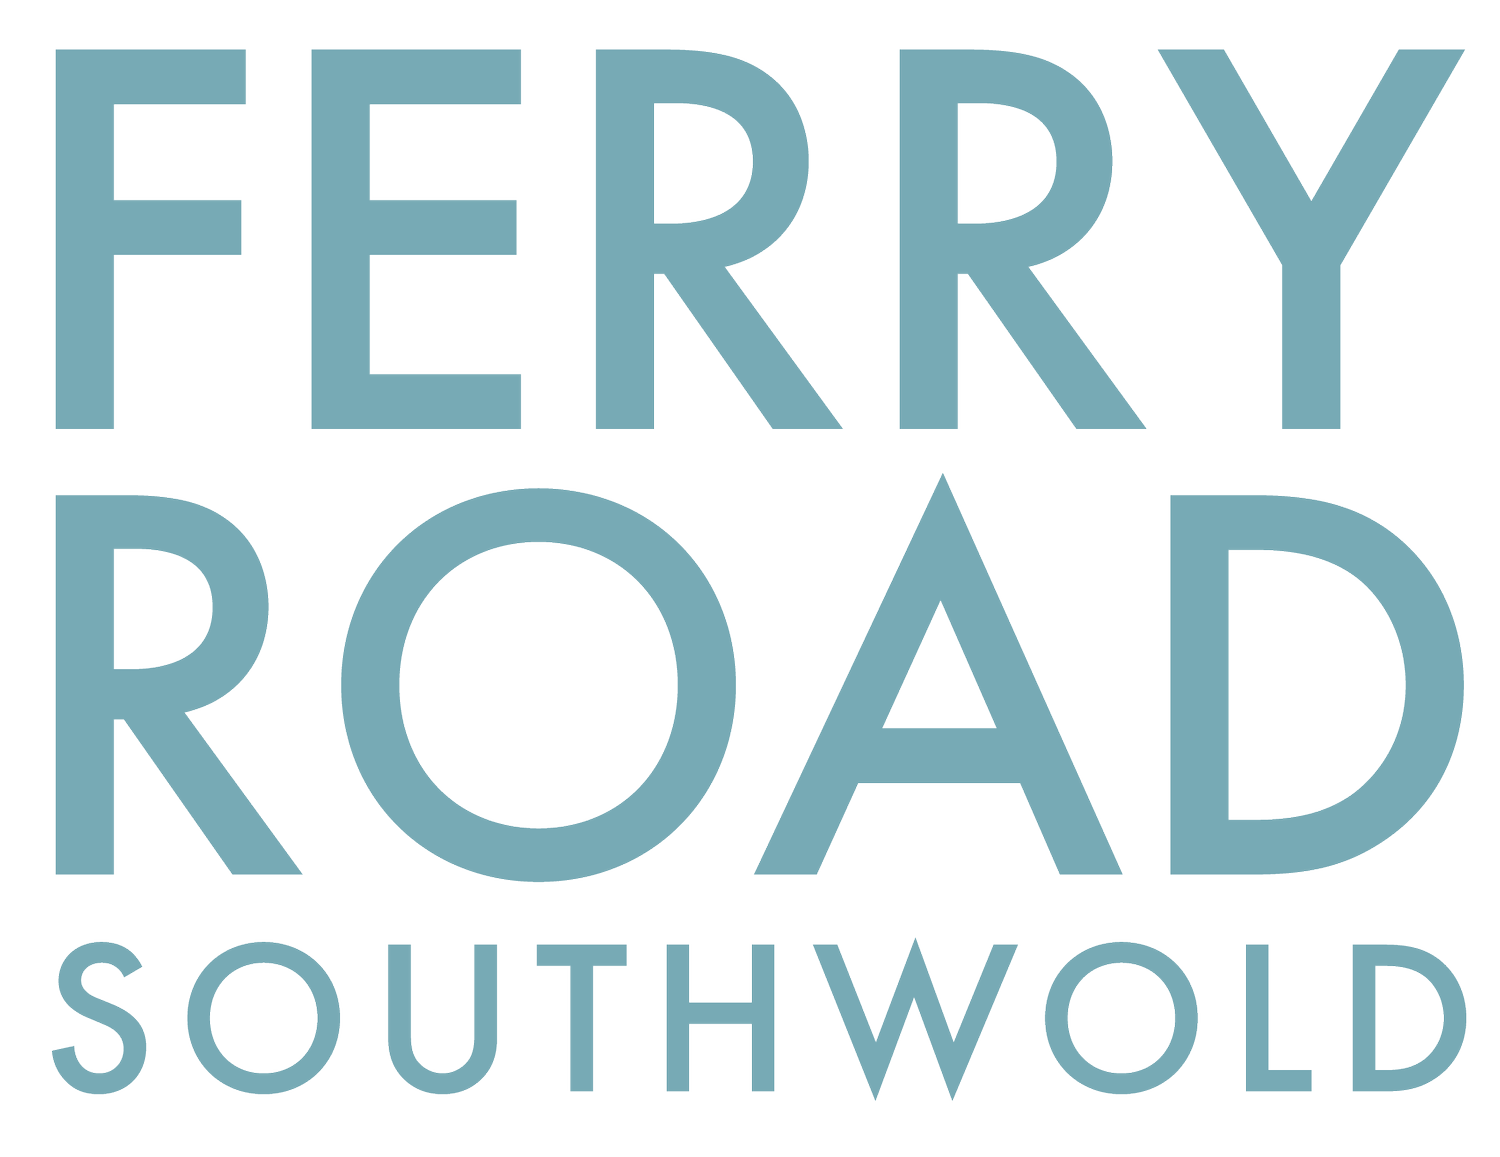 Ferry Road Southwold